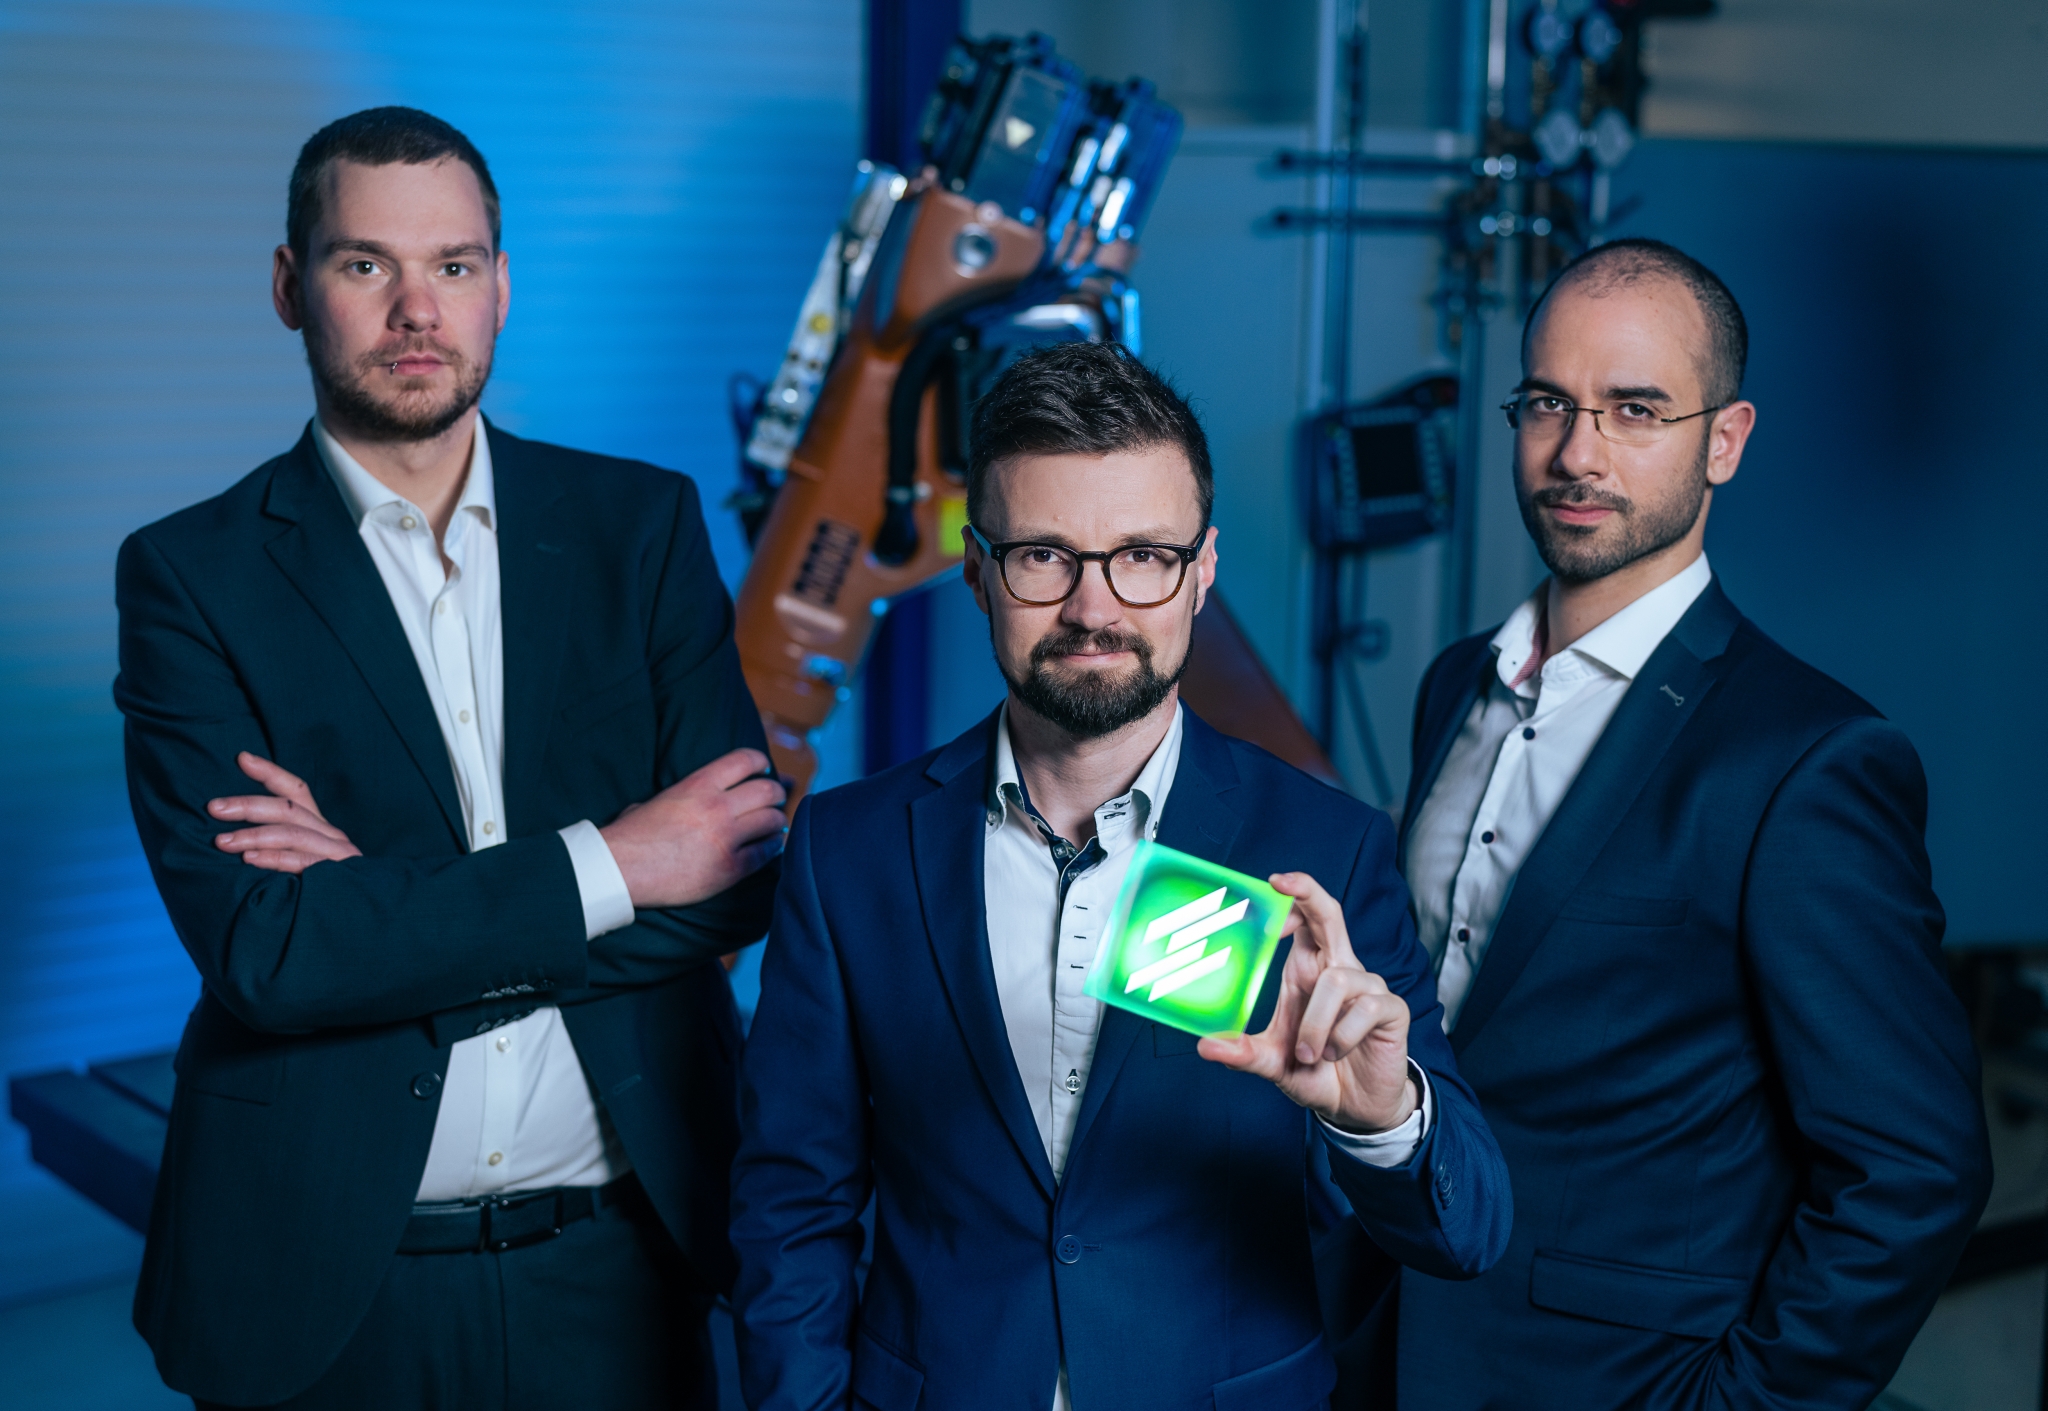 The technology, which has been researched at Fraunhofer IWS and TU Dresden over the past decade, is now ready for the market. For this and the associated hardware solutions Fusion Bionic is the world's first commercial supplier.